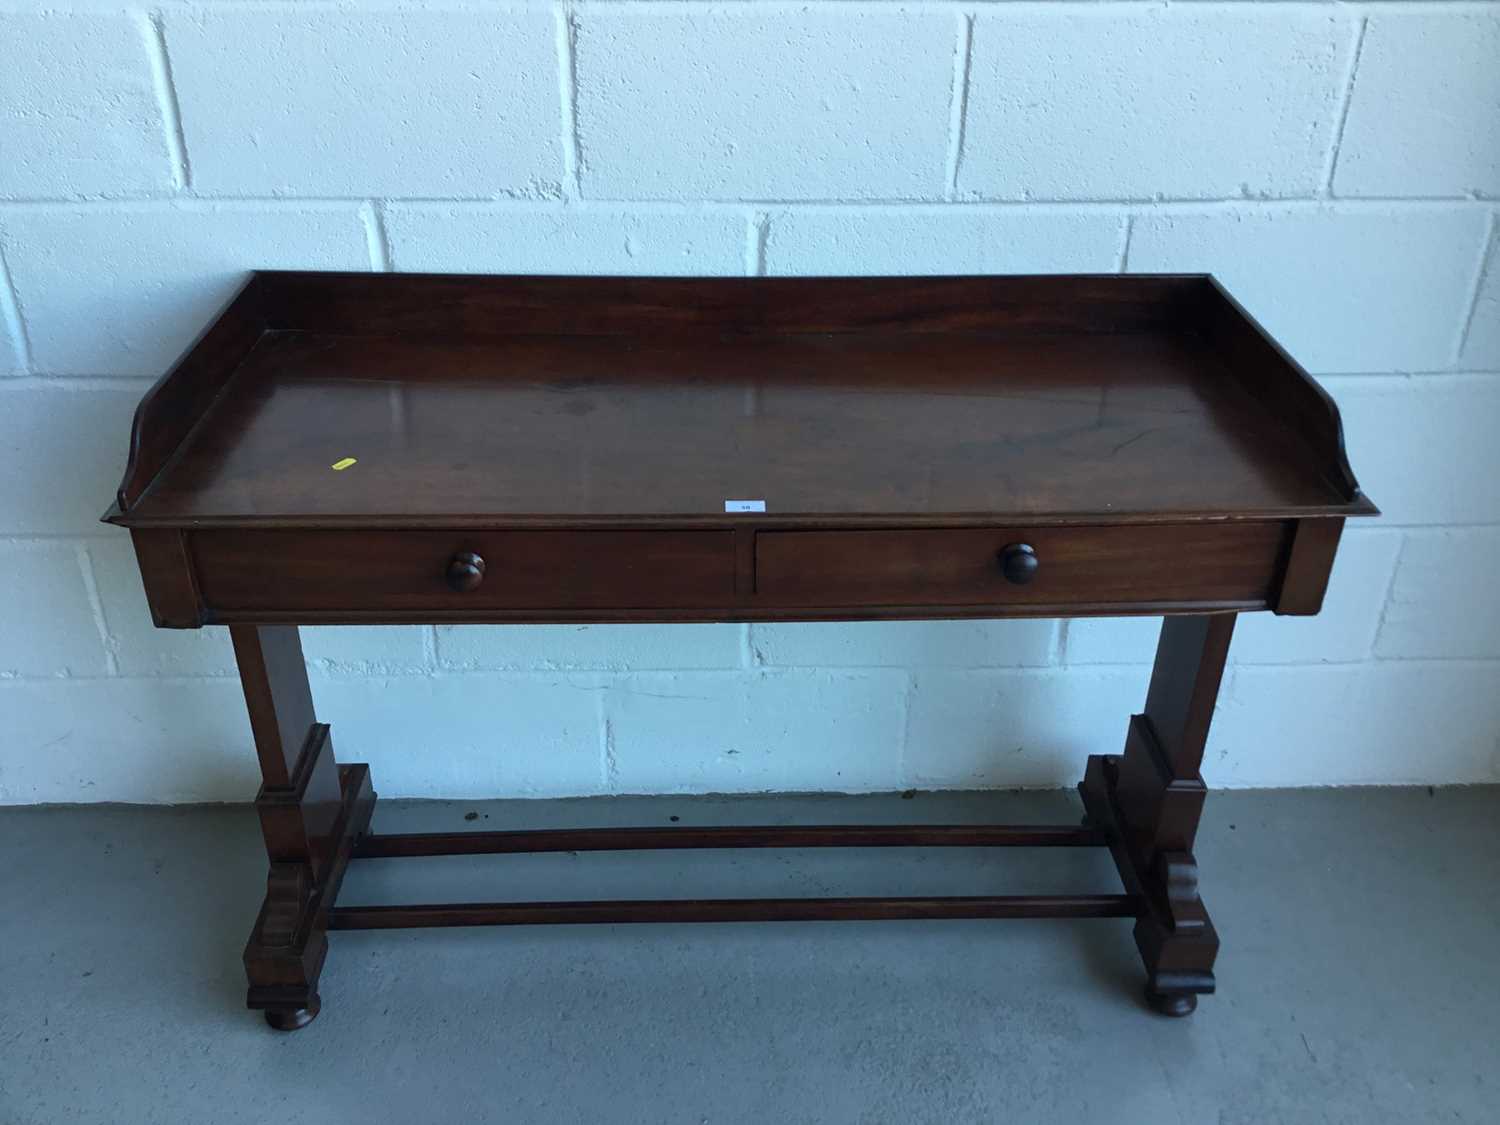 Lot 38 - Victorian mahogany hall table with raised ledge back and sides, end standards joined by two stretchers on bun feet, 122cm in length, 82cm in height, 49cm depth